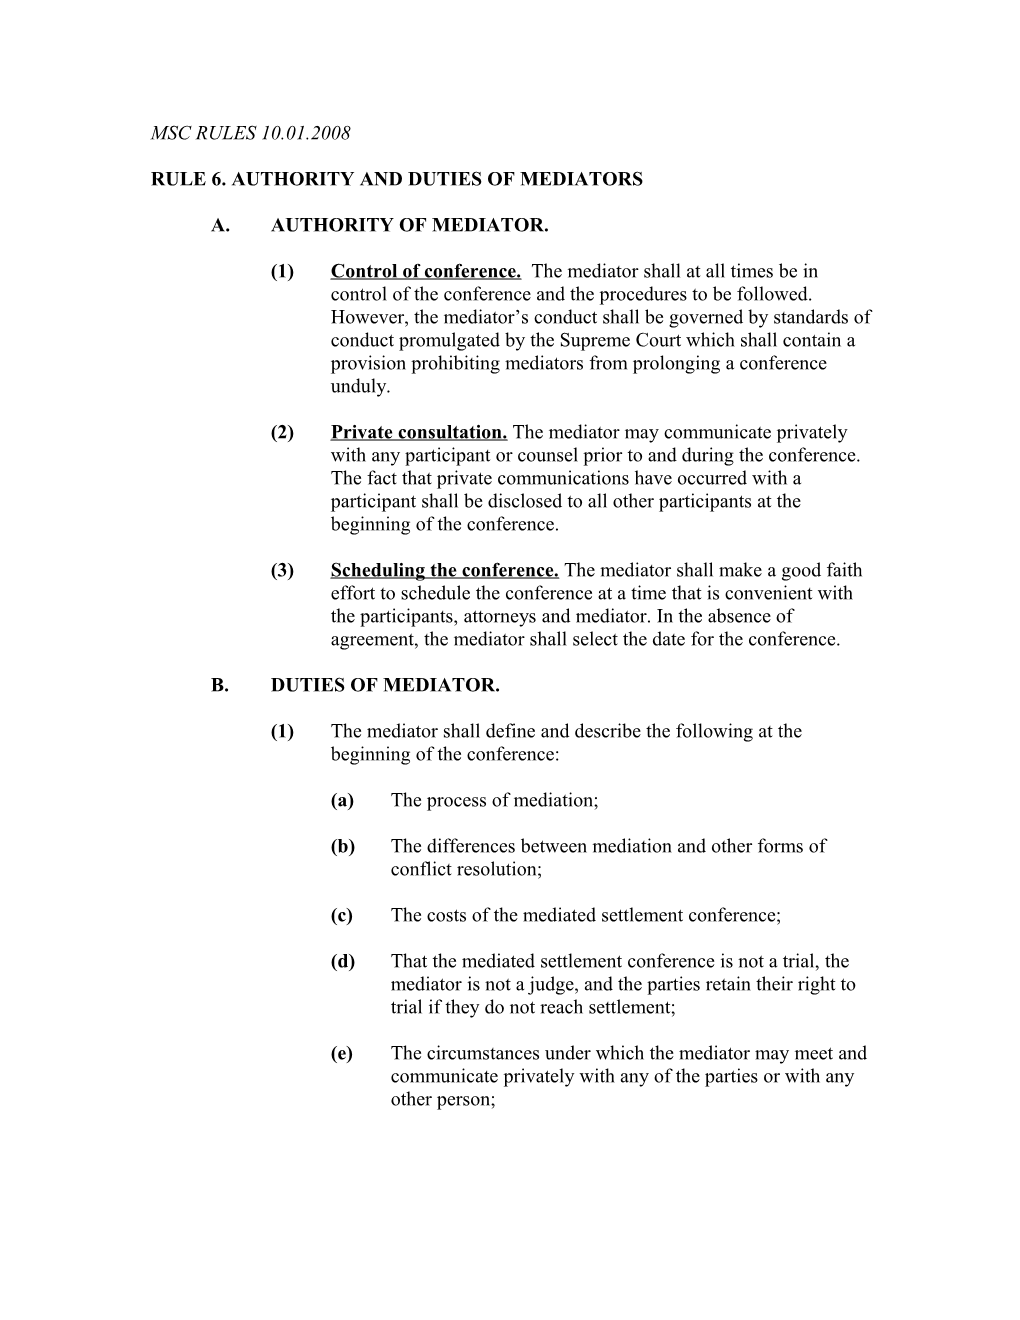 Rule 6. Authority and Duties of Mediators